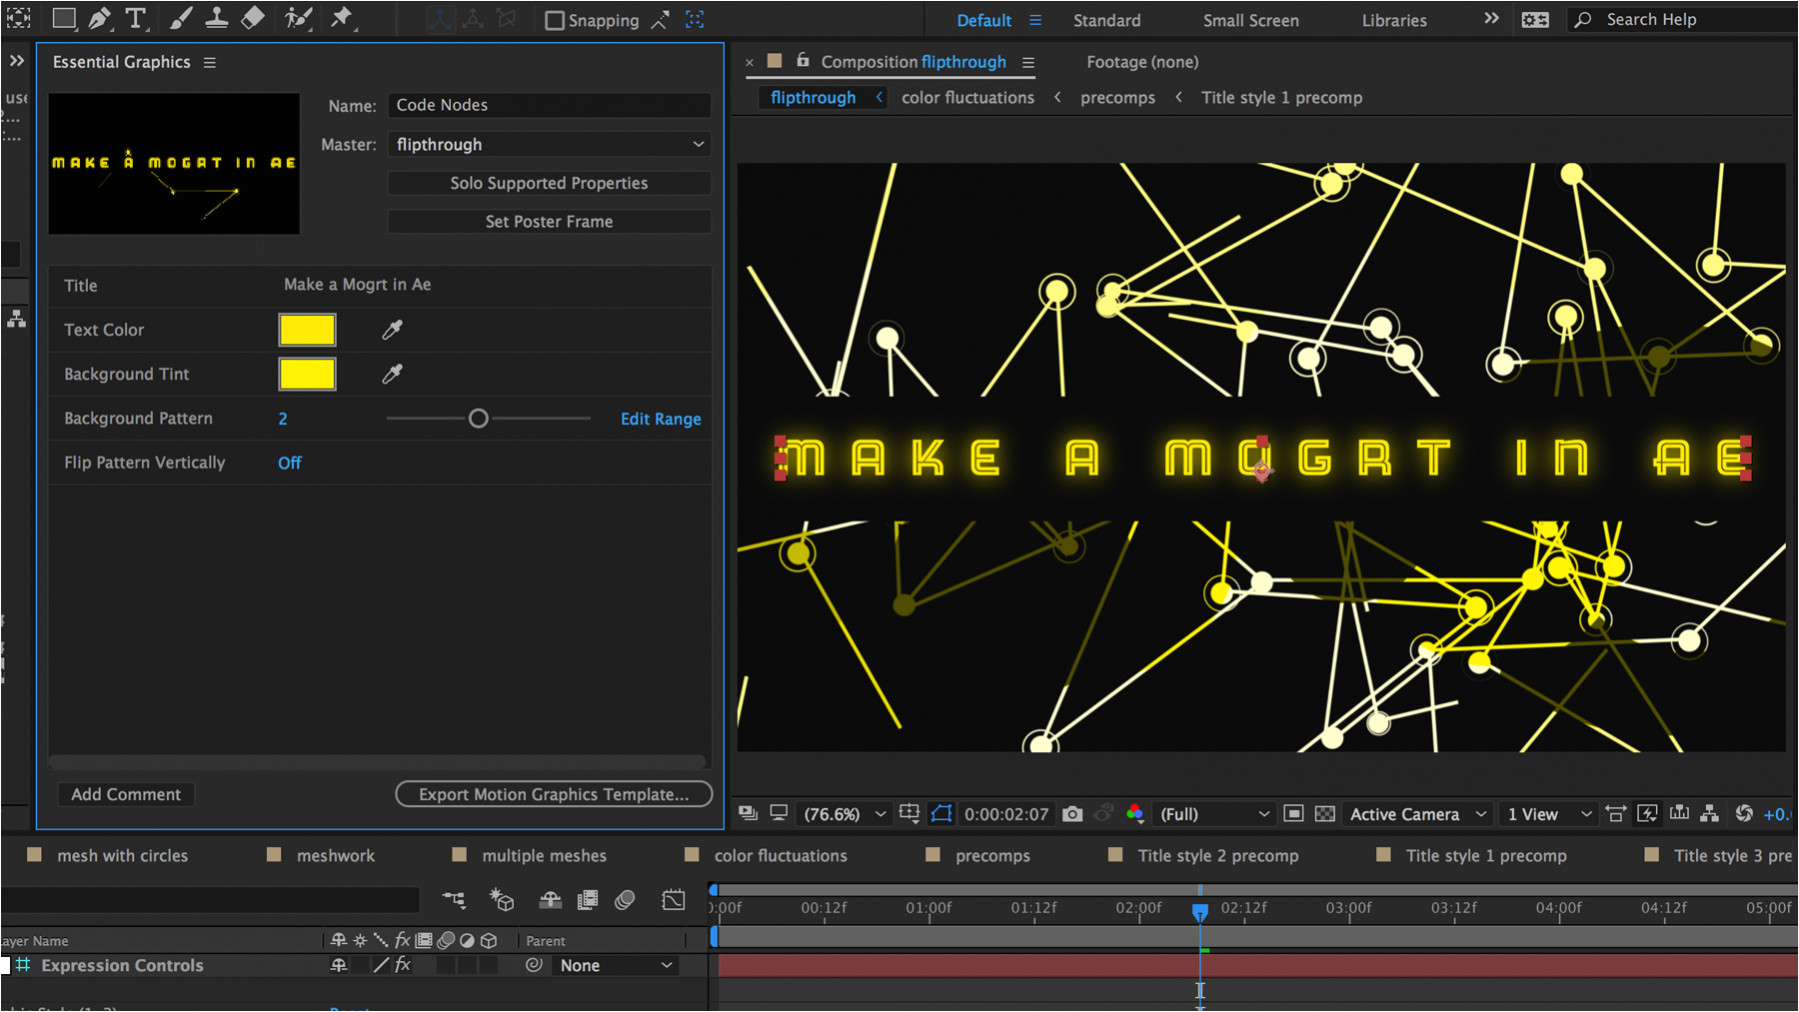 creating motion graphics templates in adobe after effects